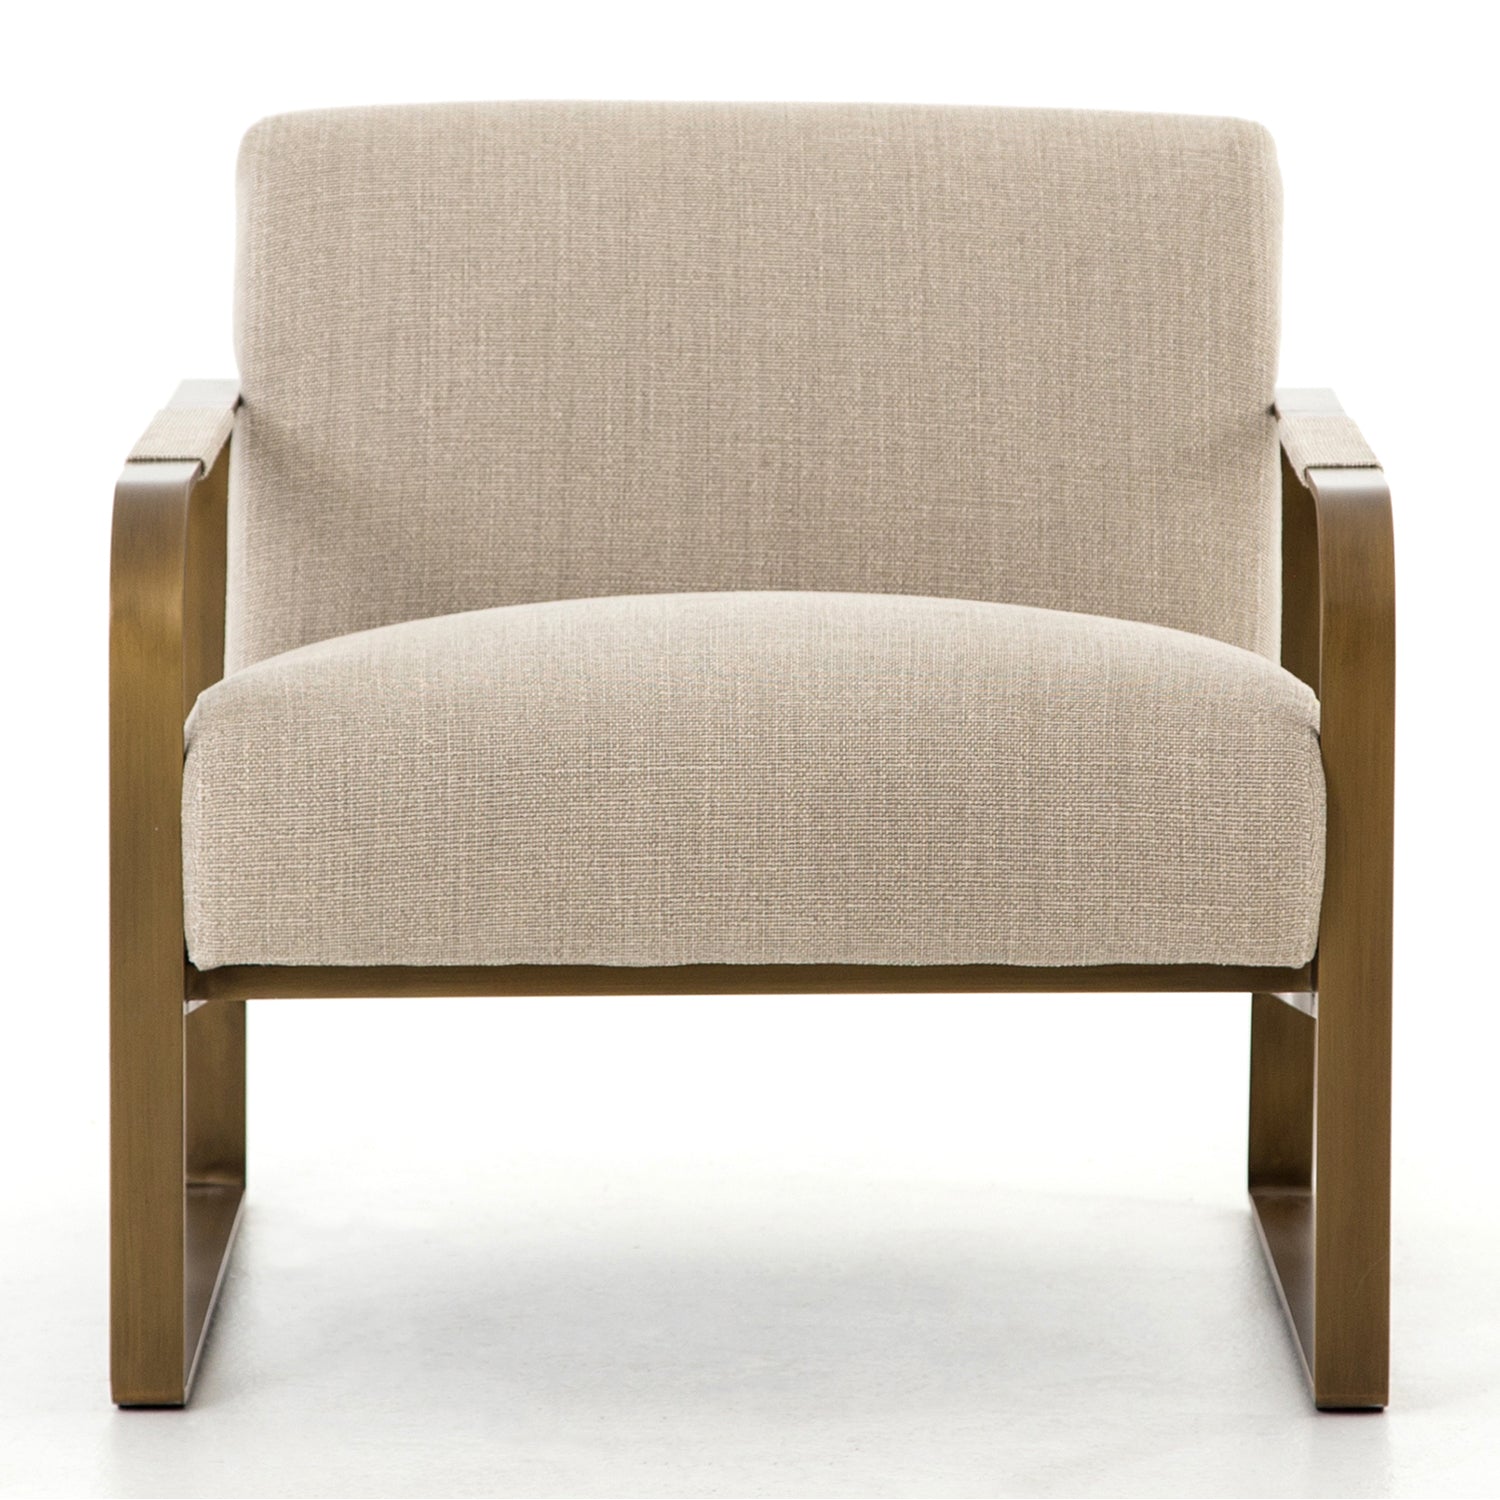 Four Hands Jules Chair – Paynes Gray